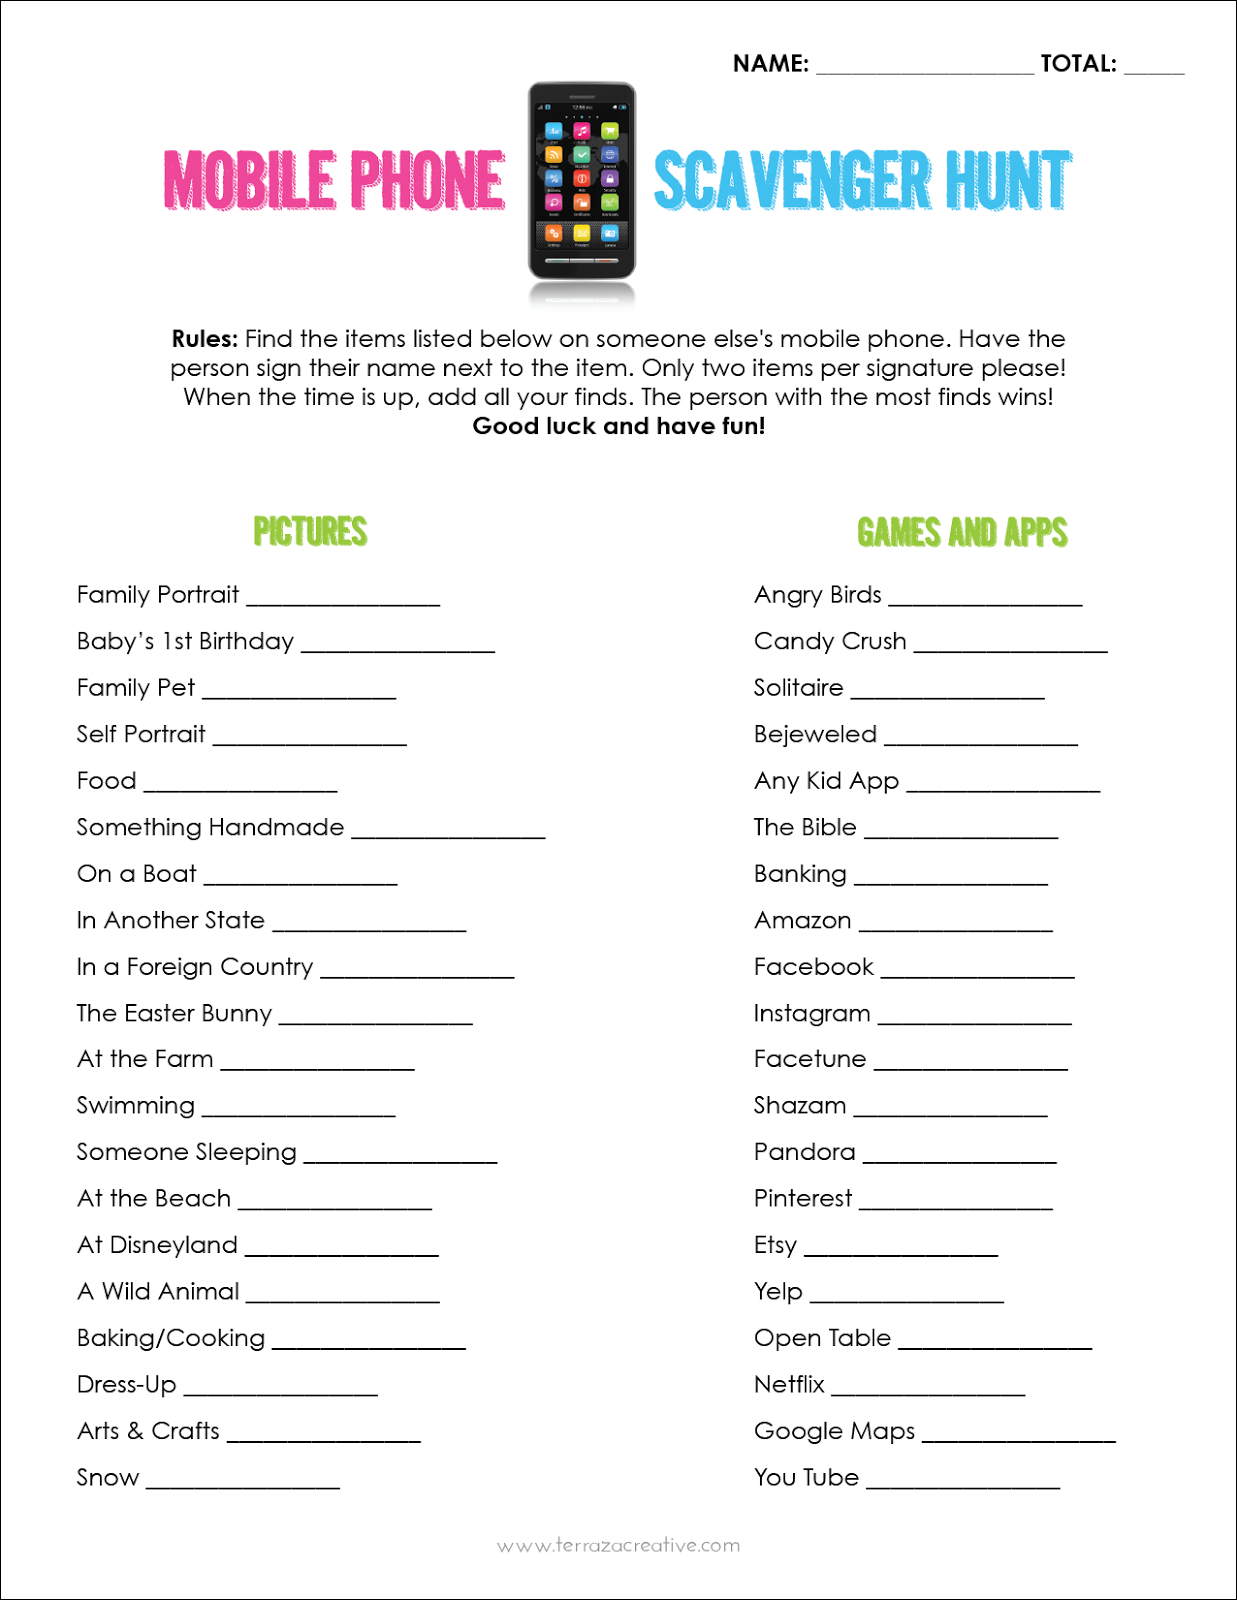 Mobile Phone Scavenger Hunt - Free Printable | A Fierce Flourishing - Over The Hill Games Free Printable